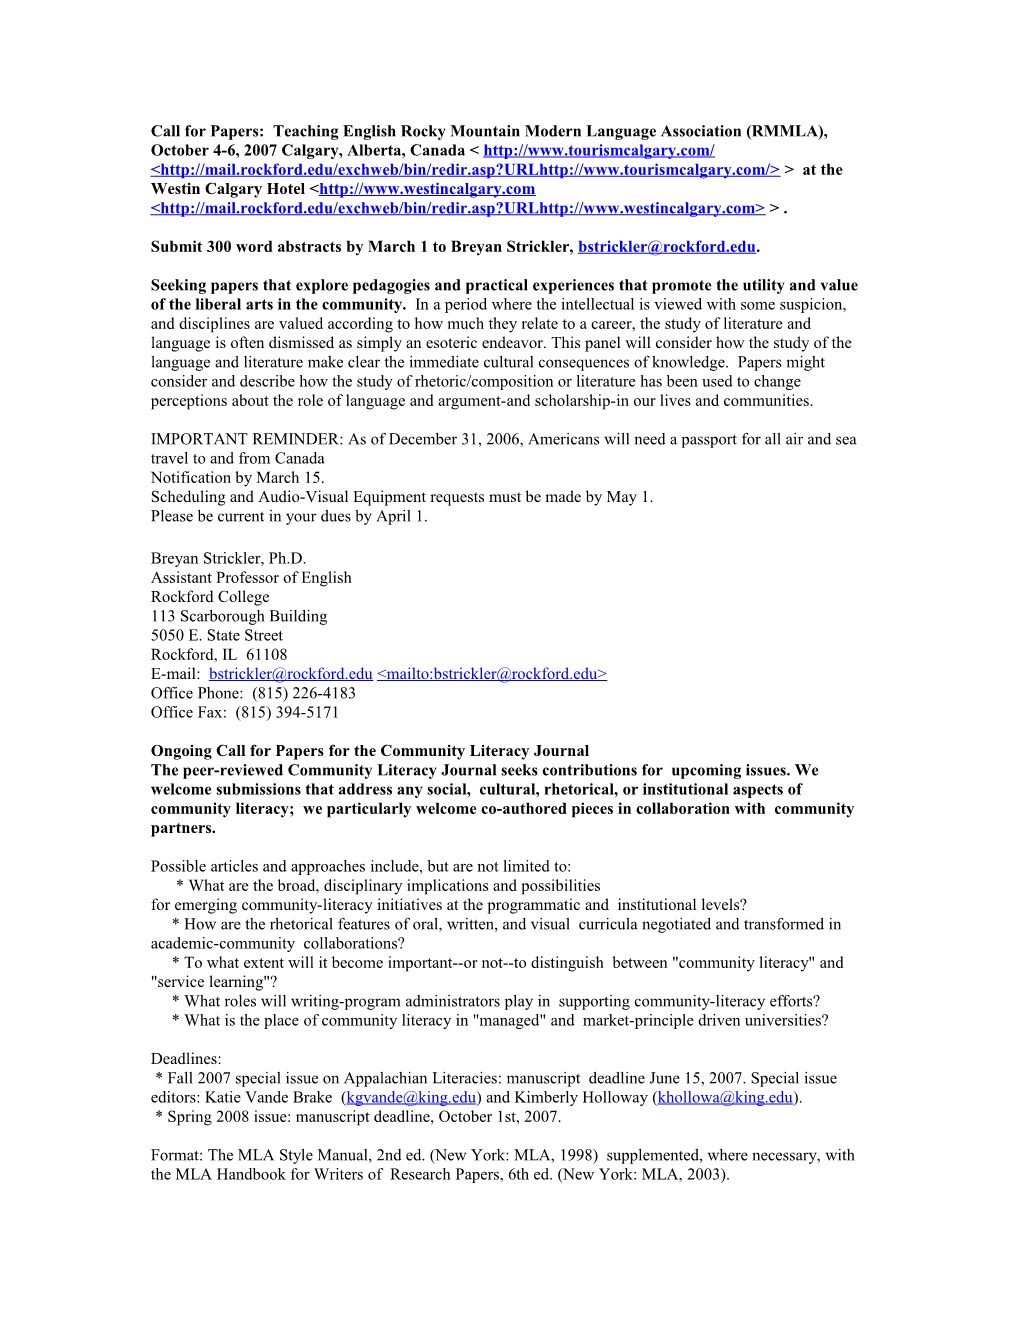 Call for Papers: Teaching English Rocky Mountain Modern Language Association (RMMLA), October